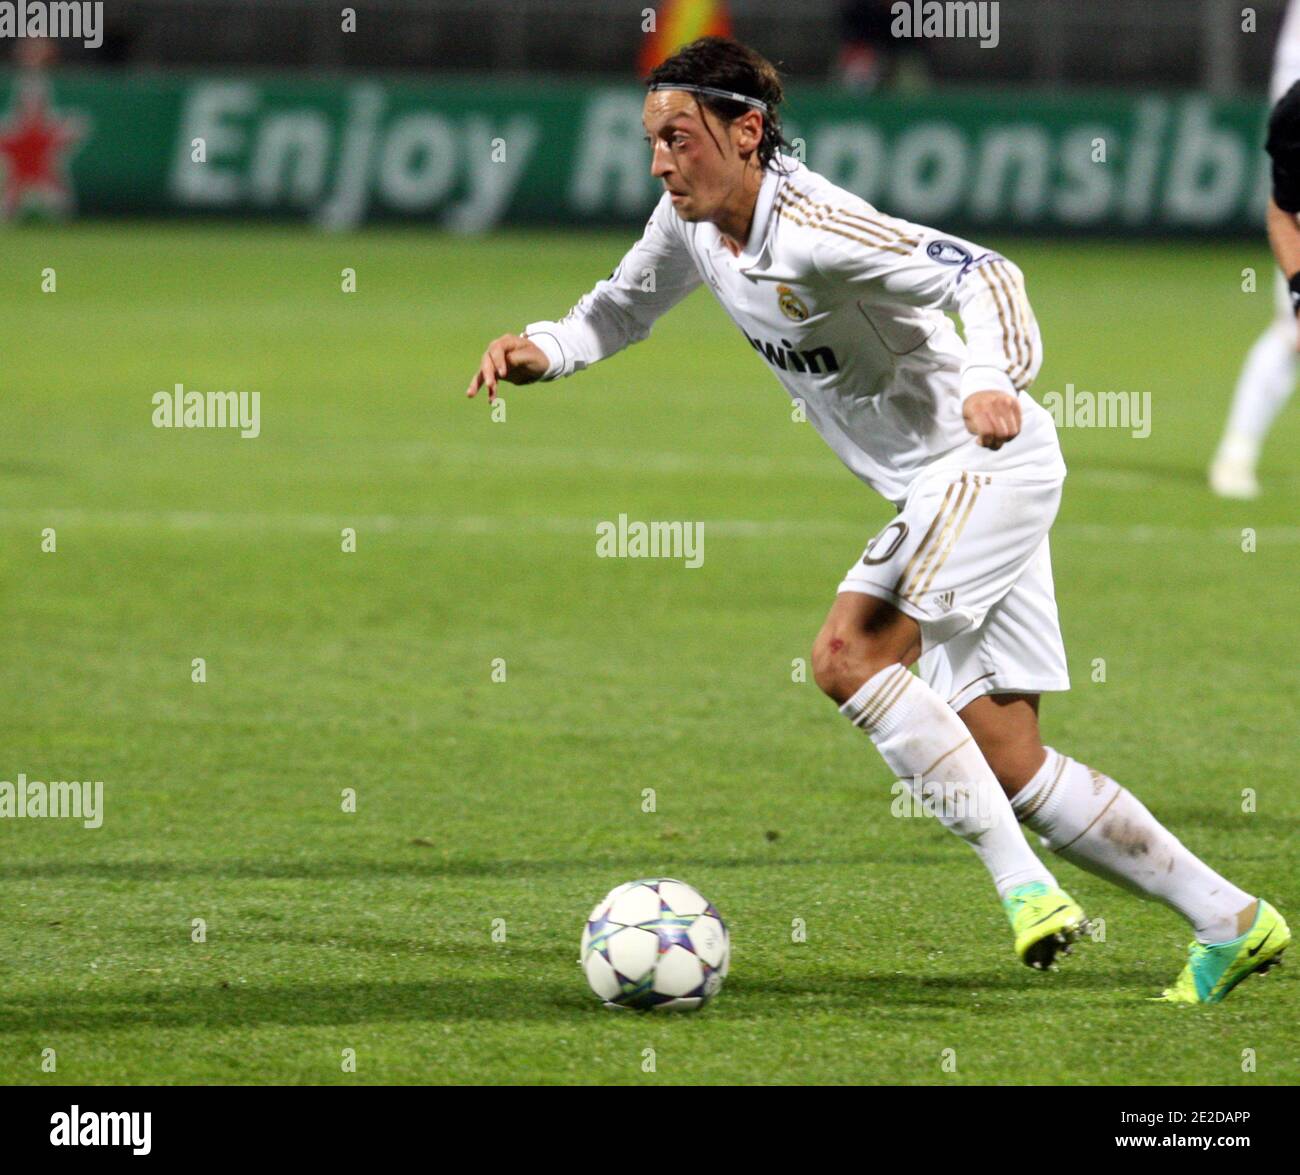 Real Madrid's Mesut Ozil during the UEFA Champions League soccer match, Olympique Lyonnais Vs Real Madrid at Gerland stadium in Lyon, France on November 2, 2011. Real Madrid won 2-0. Photo by Vincent Dargent/ABACAPRESS.COM Stock Photo